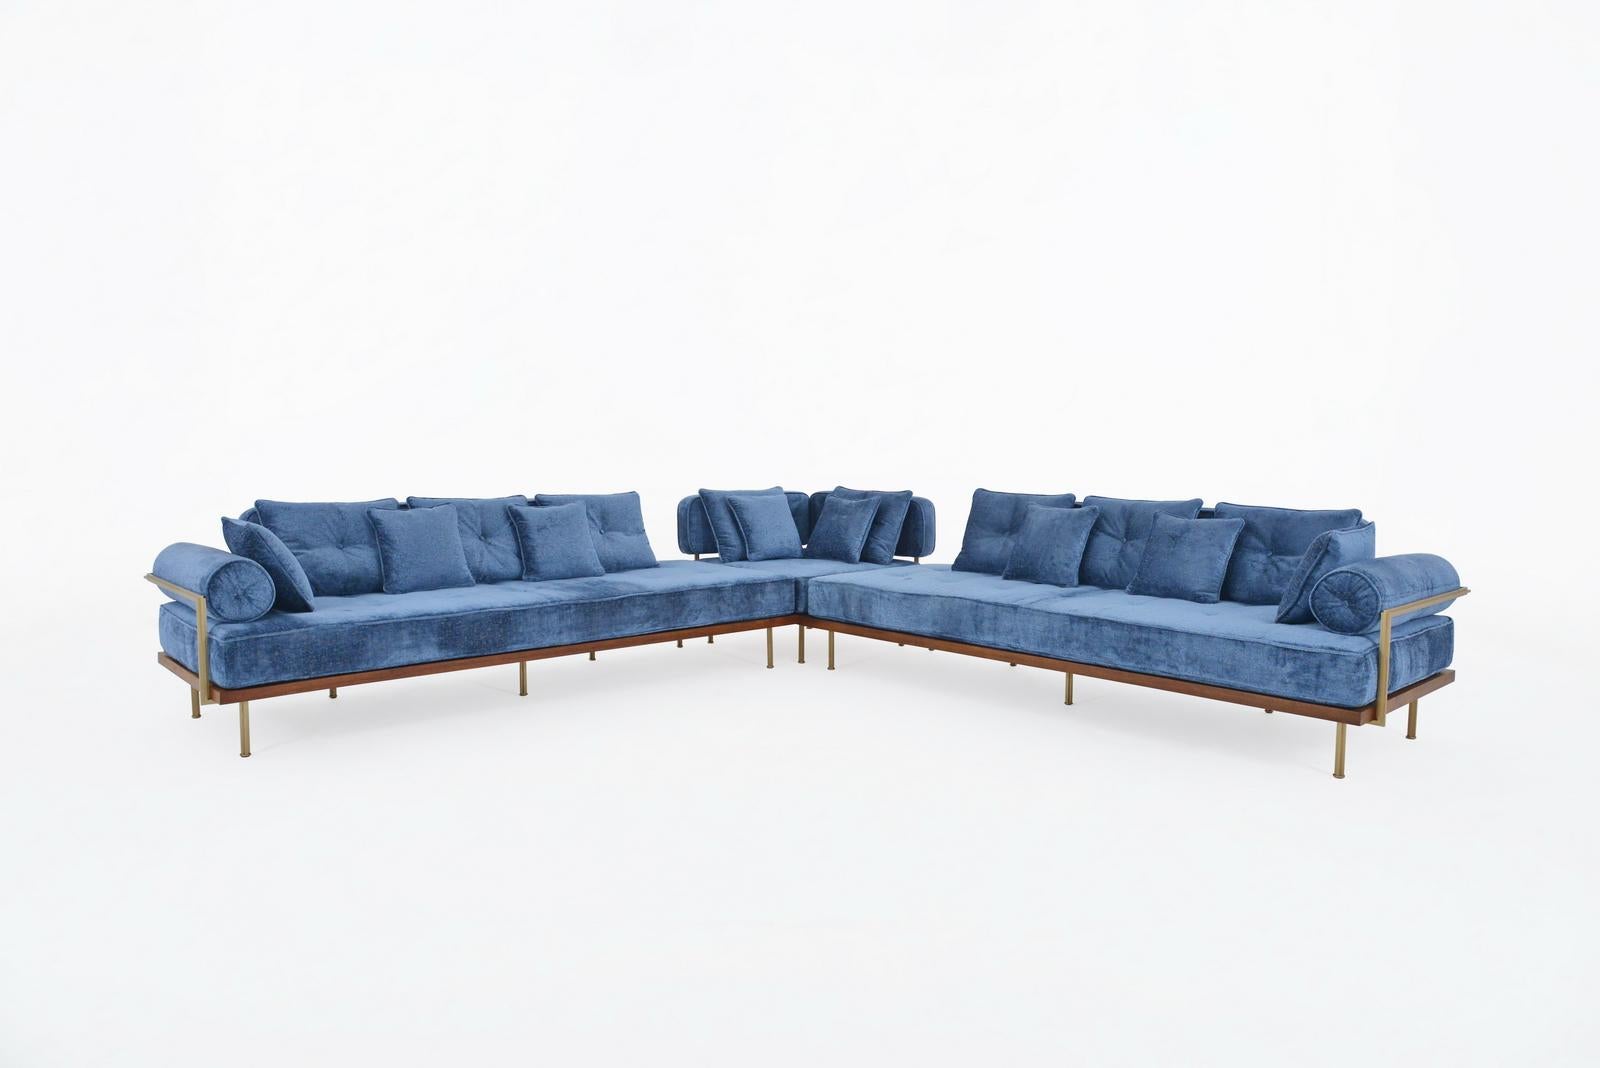 Our long-term client-turned-friend recently ordered our sectional or L-shaped sofa, featuring left, corner, and right components for flexible configurations. Crafted with care, the sofa boasts reclaimed aged Teak wood, hand-welded brass rods, a pure